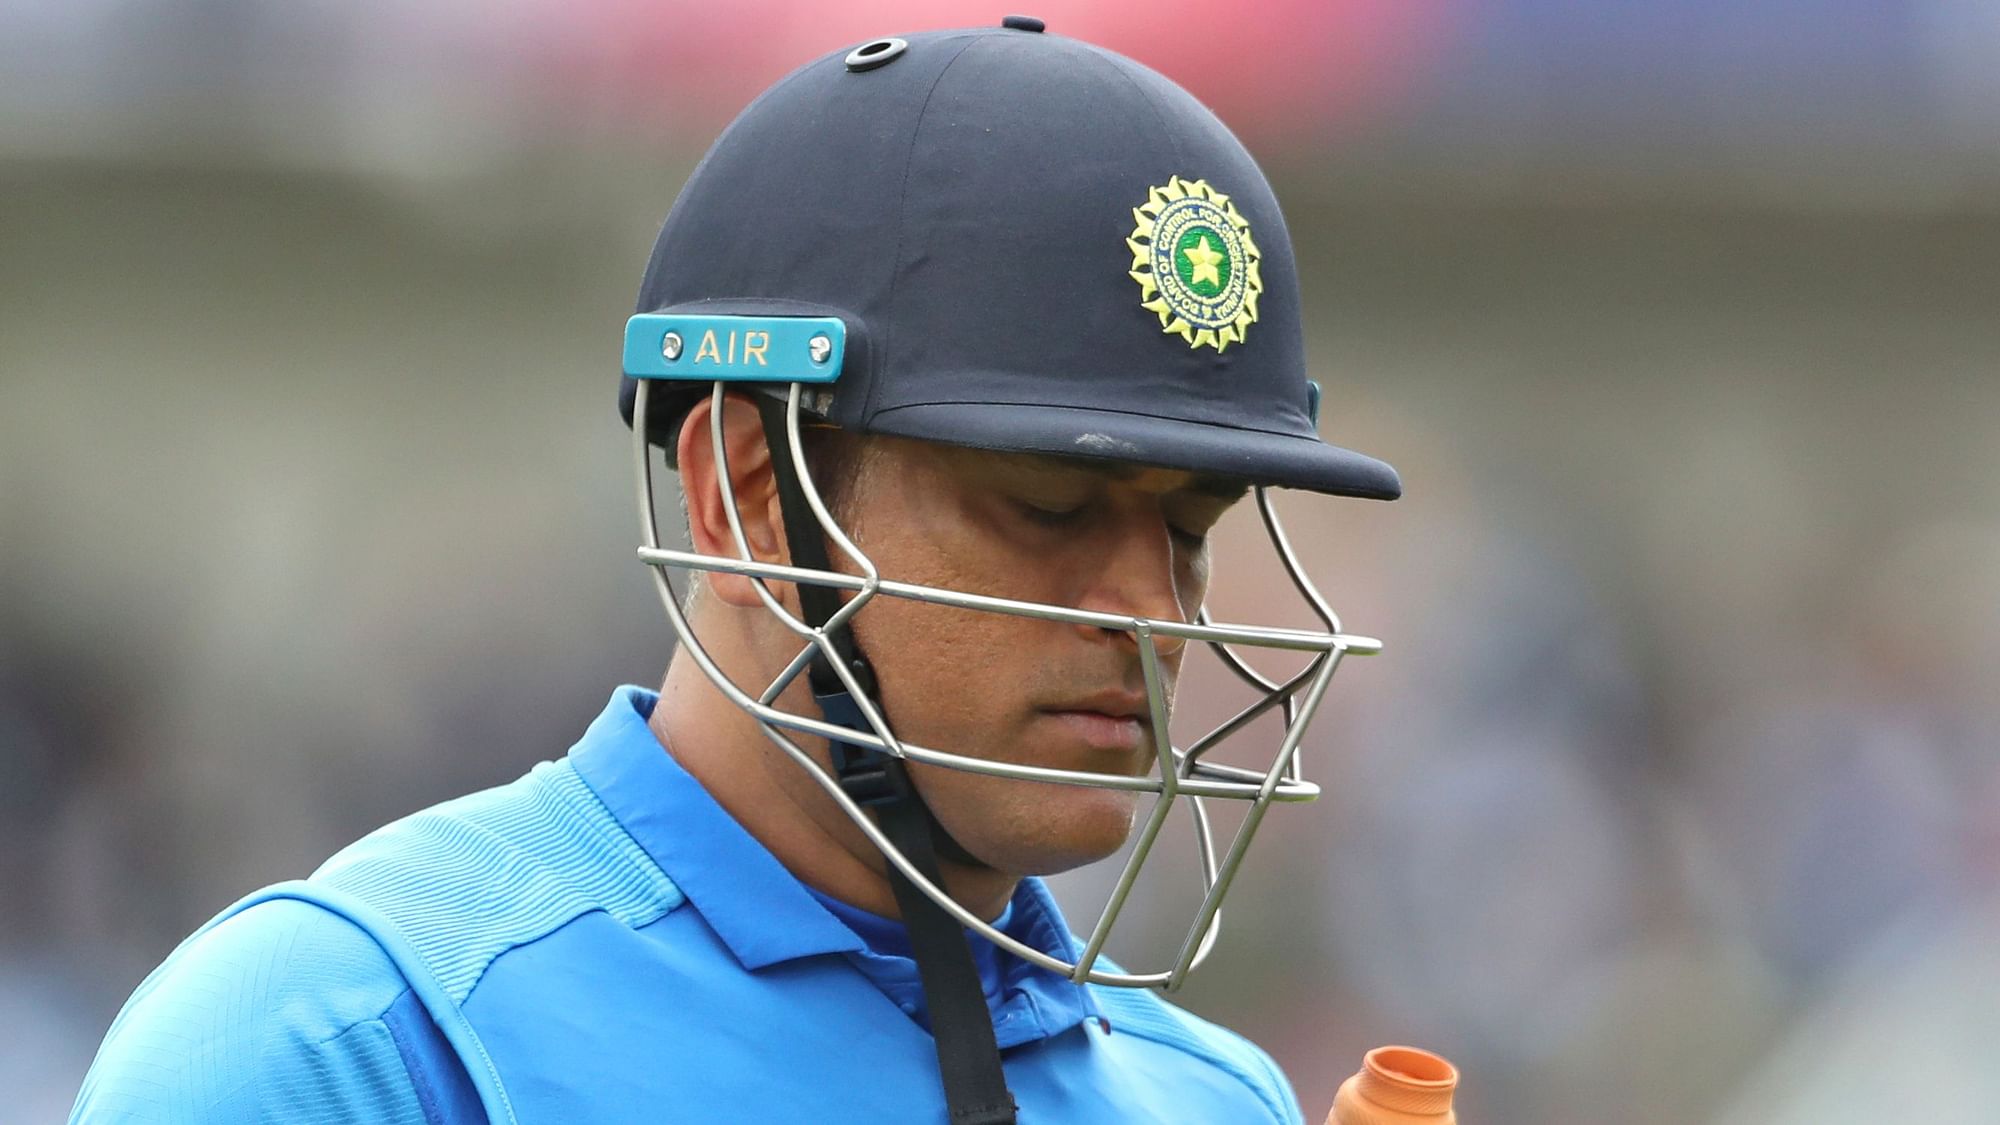 India captain Virat Kohli has said MS Dhoni has not told him anything about his future plans.